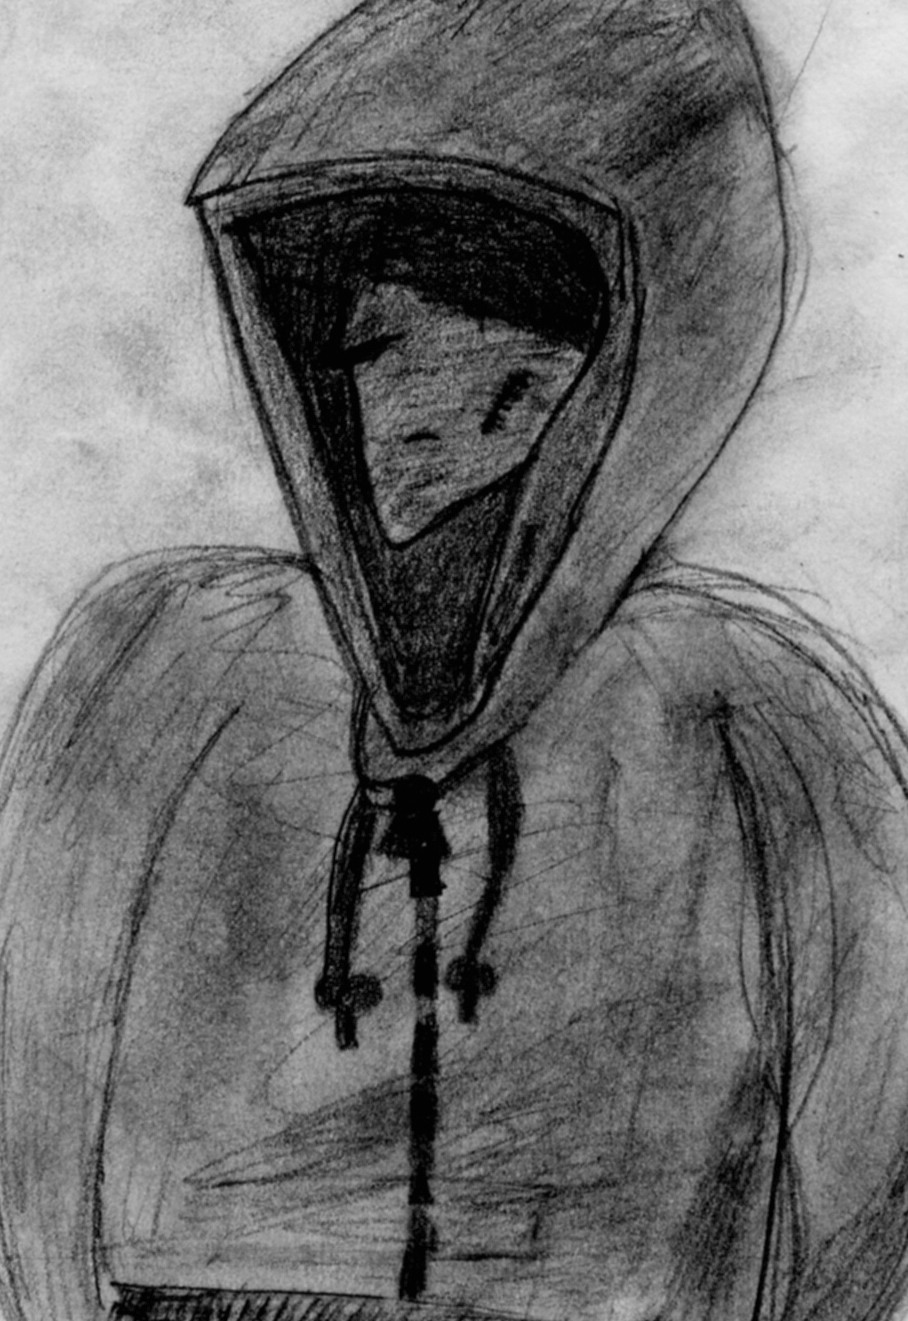 HoOdeD GuY by DoOfeR